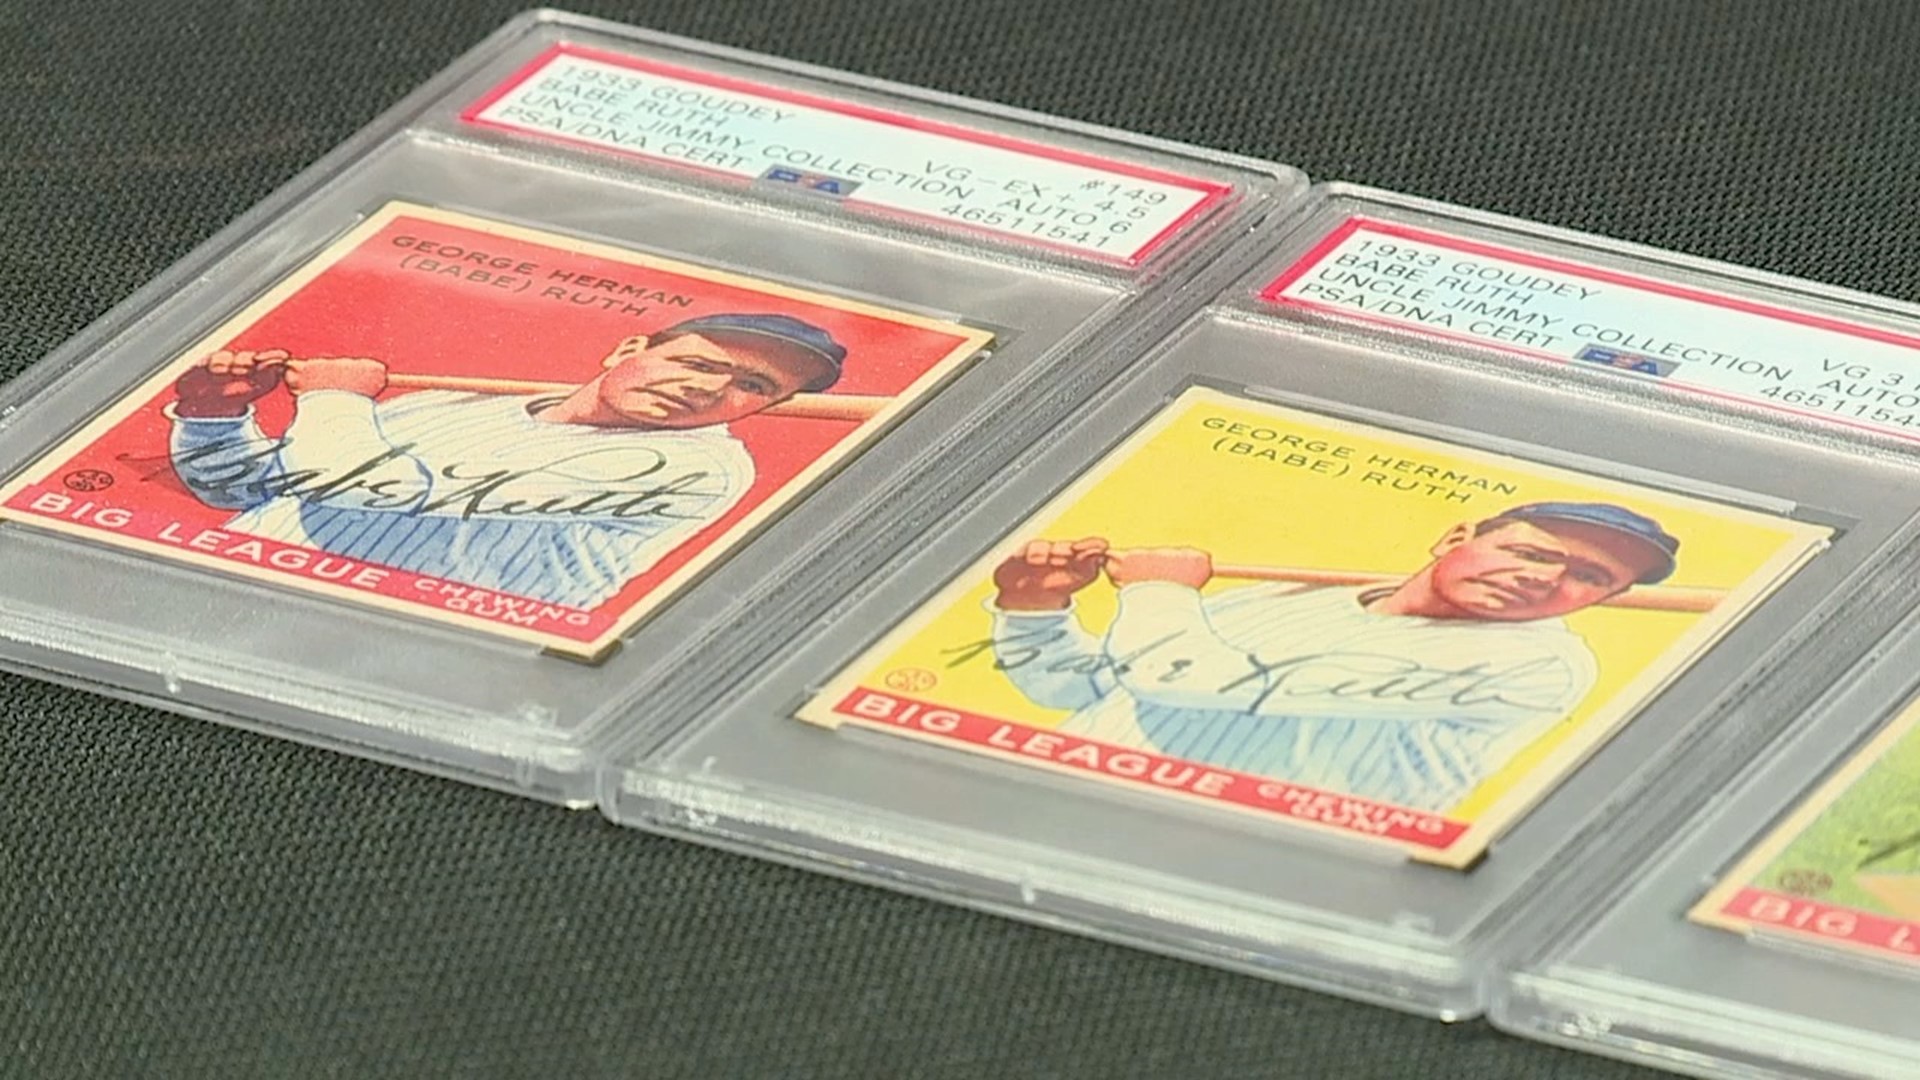 One 1933 Babe Ruth card's auction is nearing $100,000.